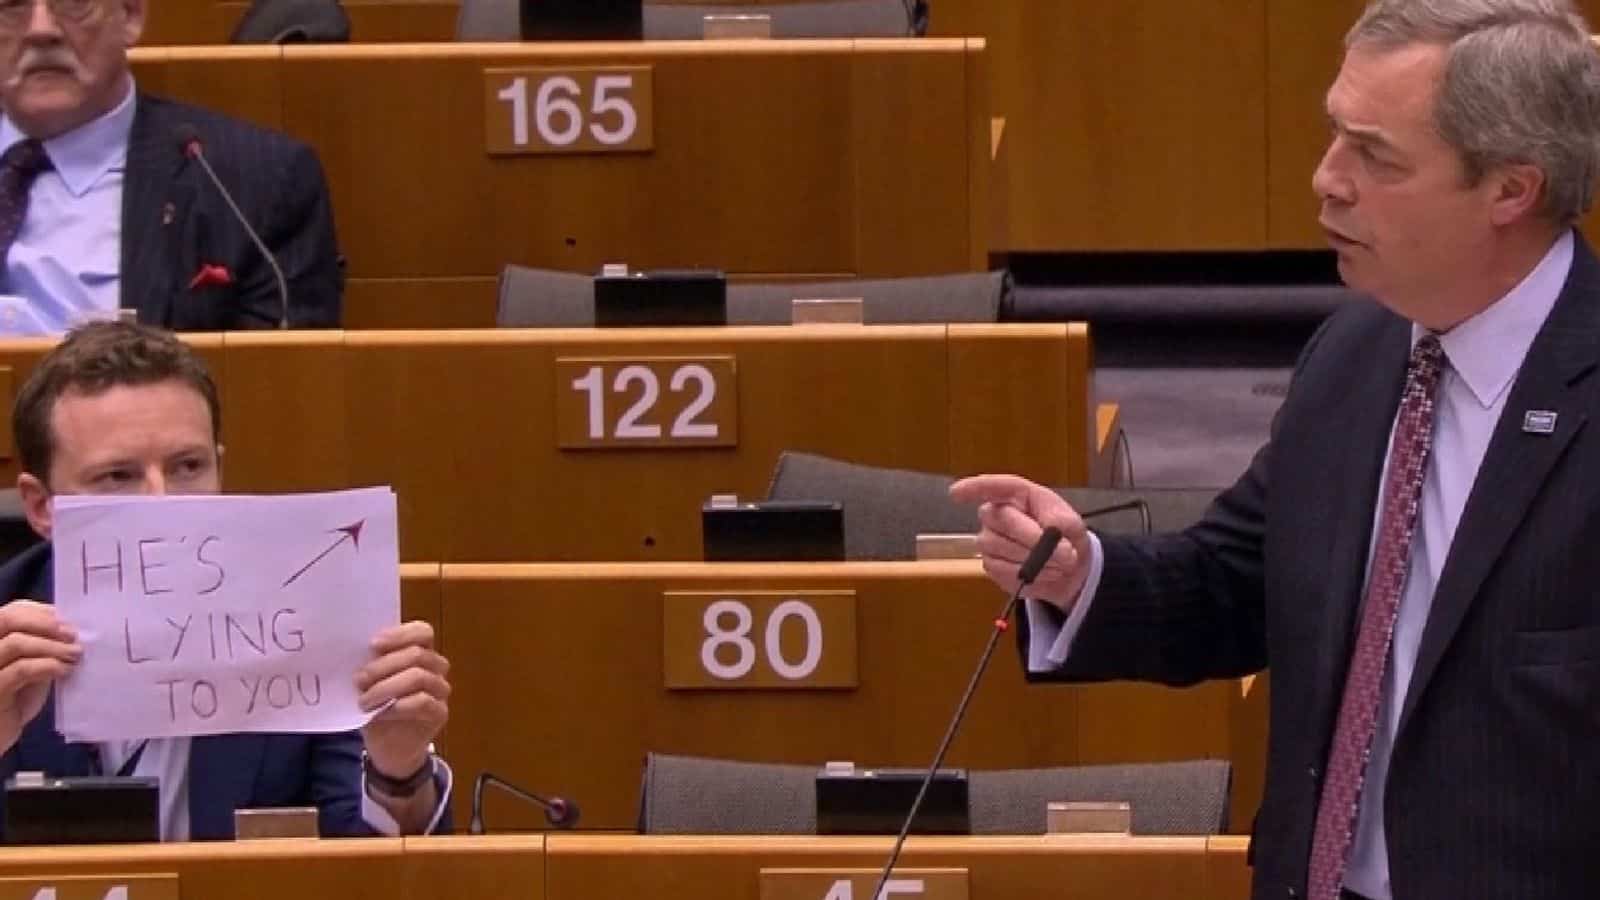 Labour MEPs will reject Withdrawal Agreement without People’s Vote amendment